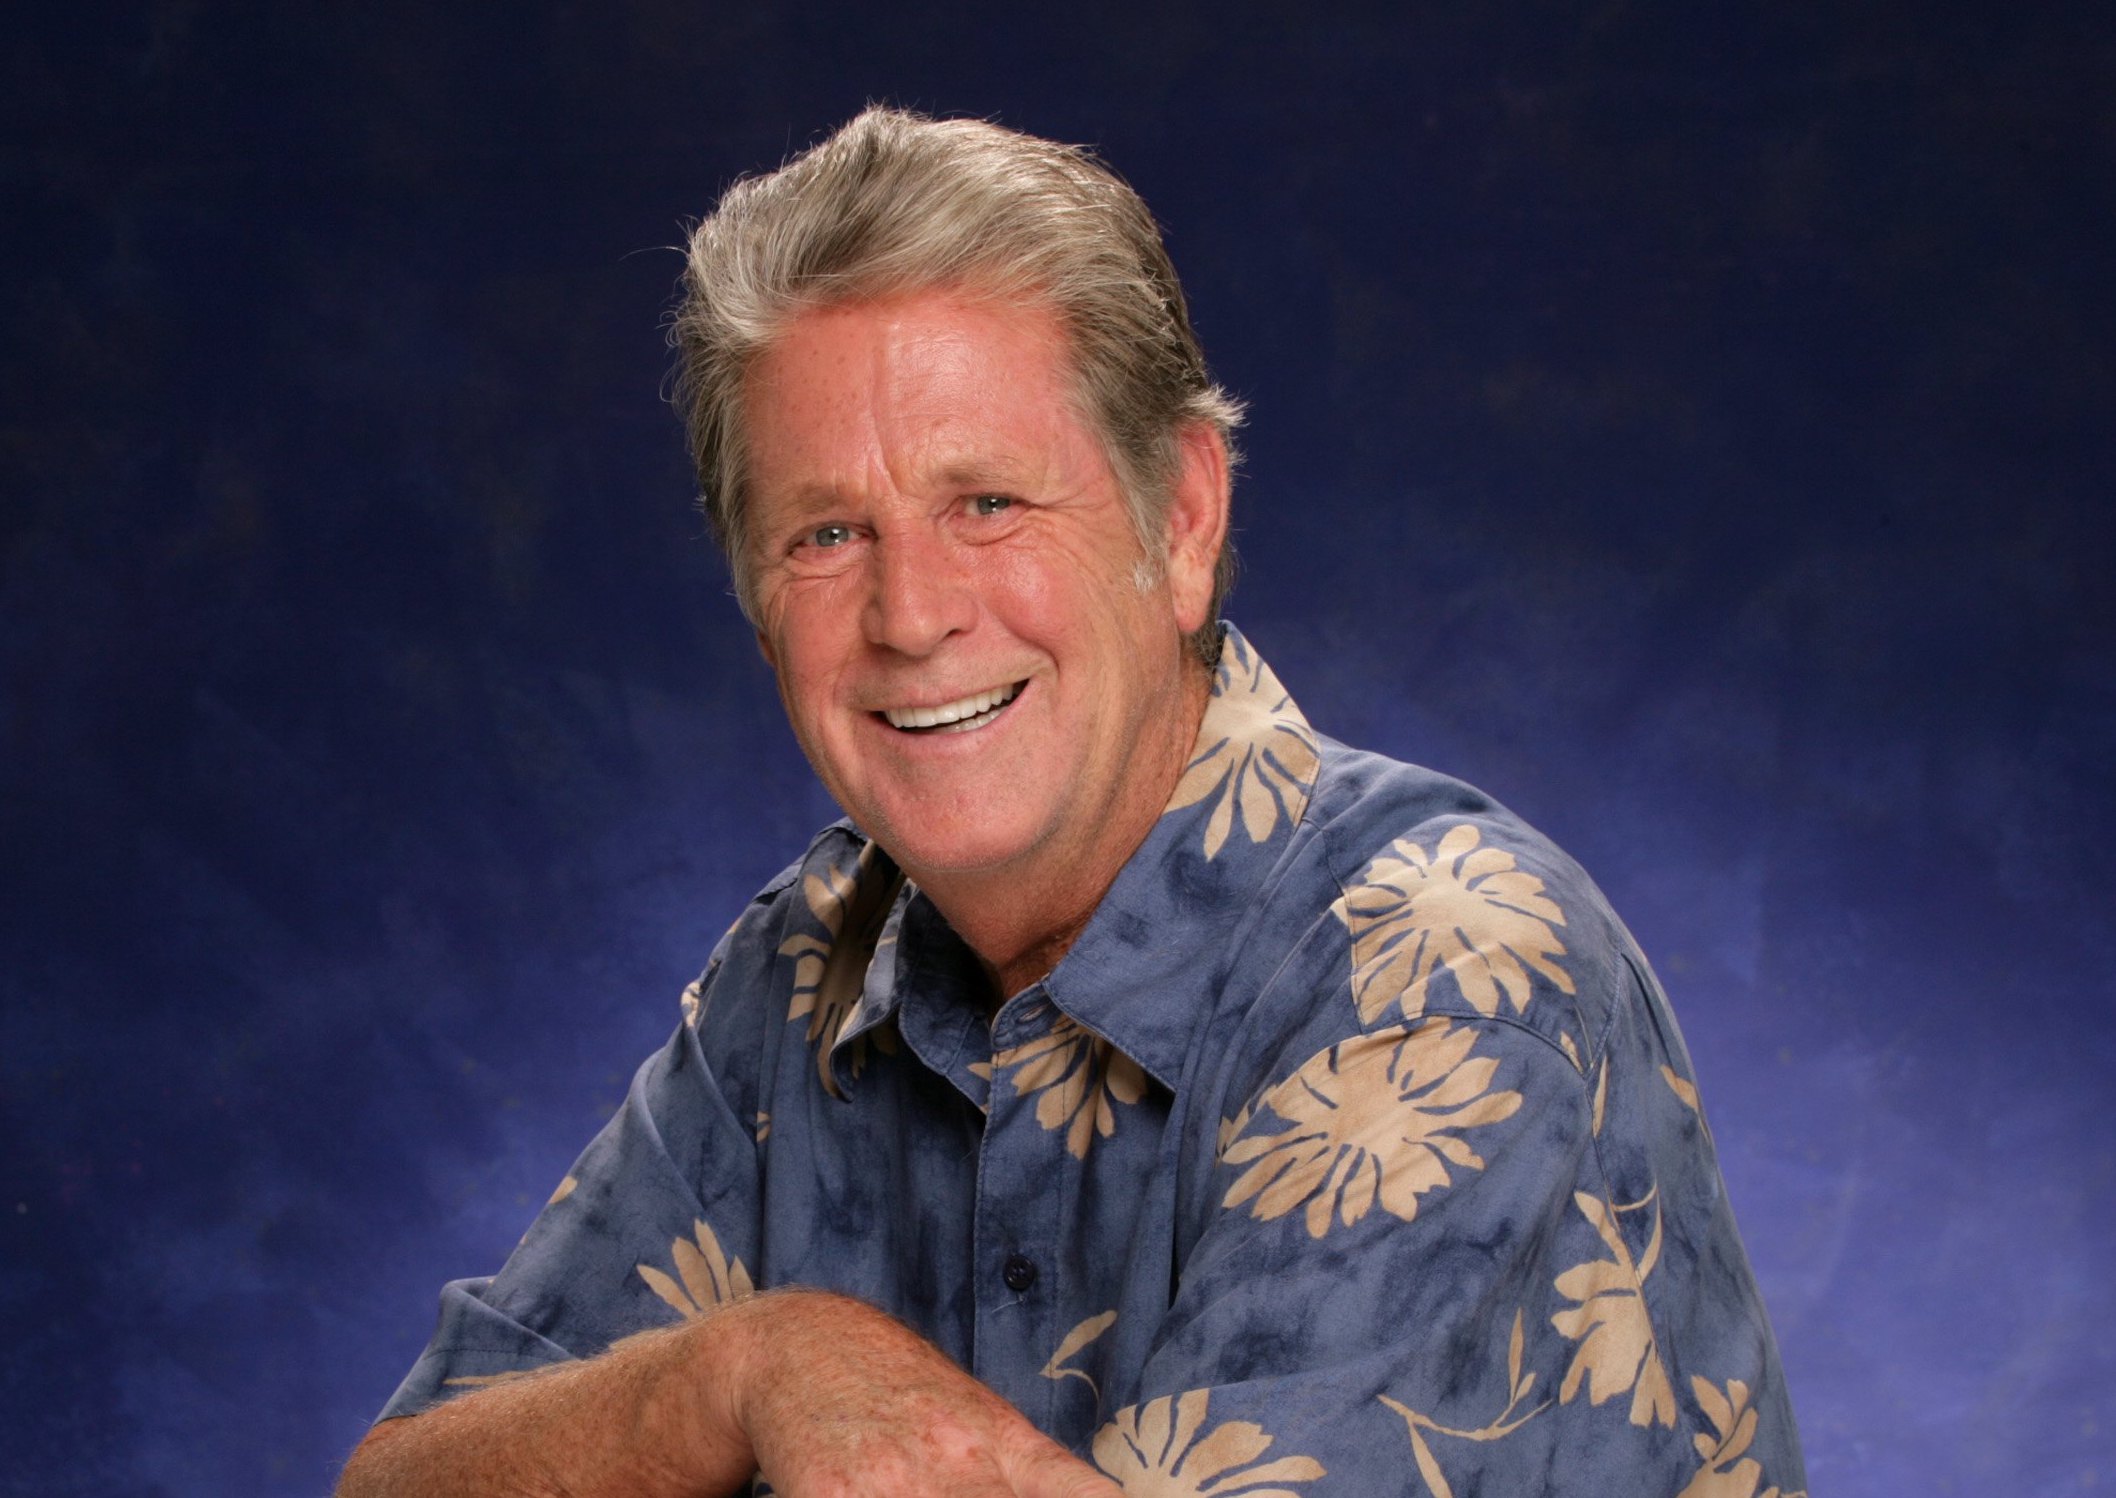 Brian Wilson of The Beach Boys placed under conservatorship following dementia diagnosis